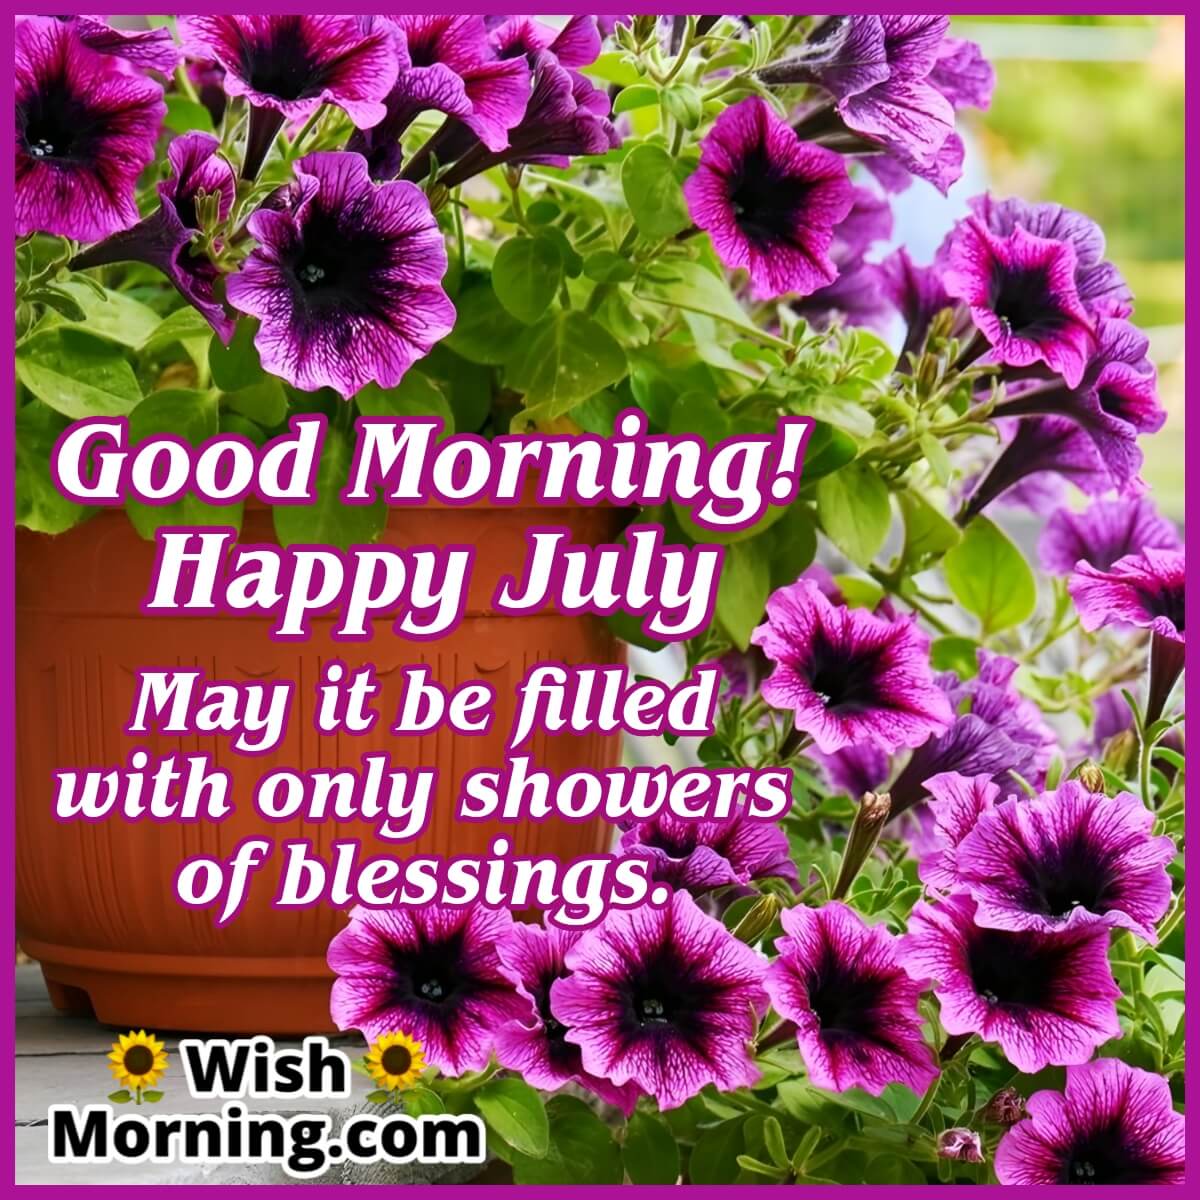 Good Morning Happy July Blessings